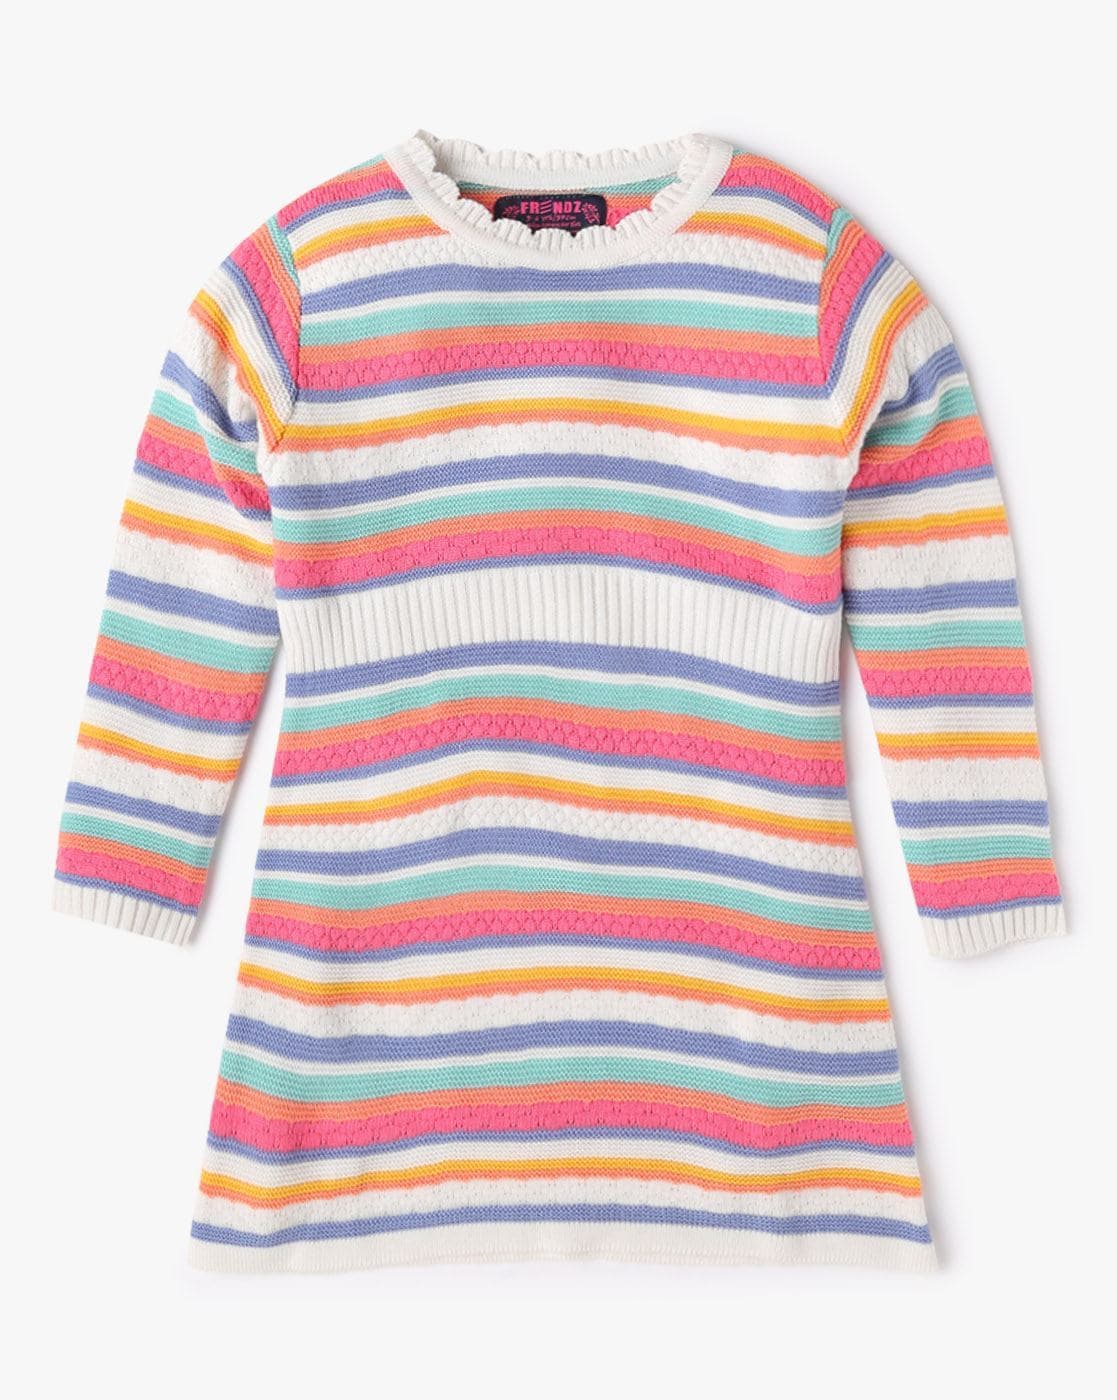 Opocos Girls Knitted Sweater Dress Cute Long Sleeve India | Ubuy